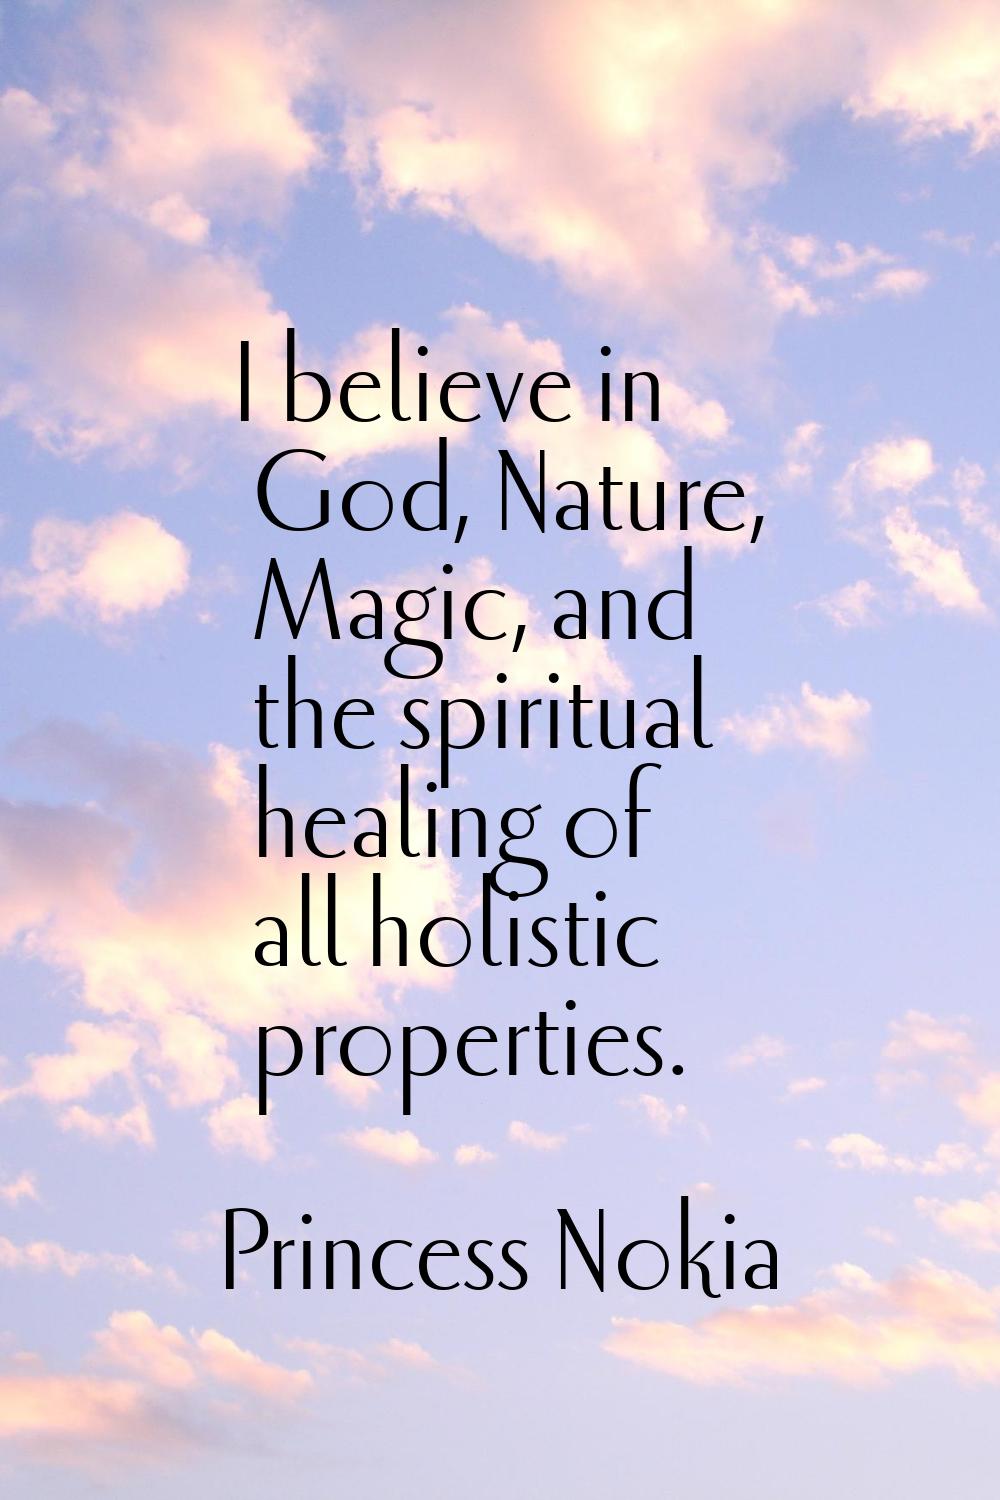 I believe in God, Nature, Magic, and the spiritual healing of all holistic properties.